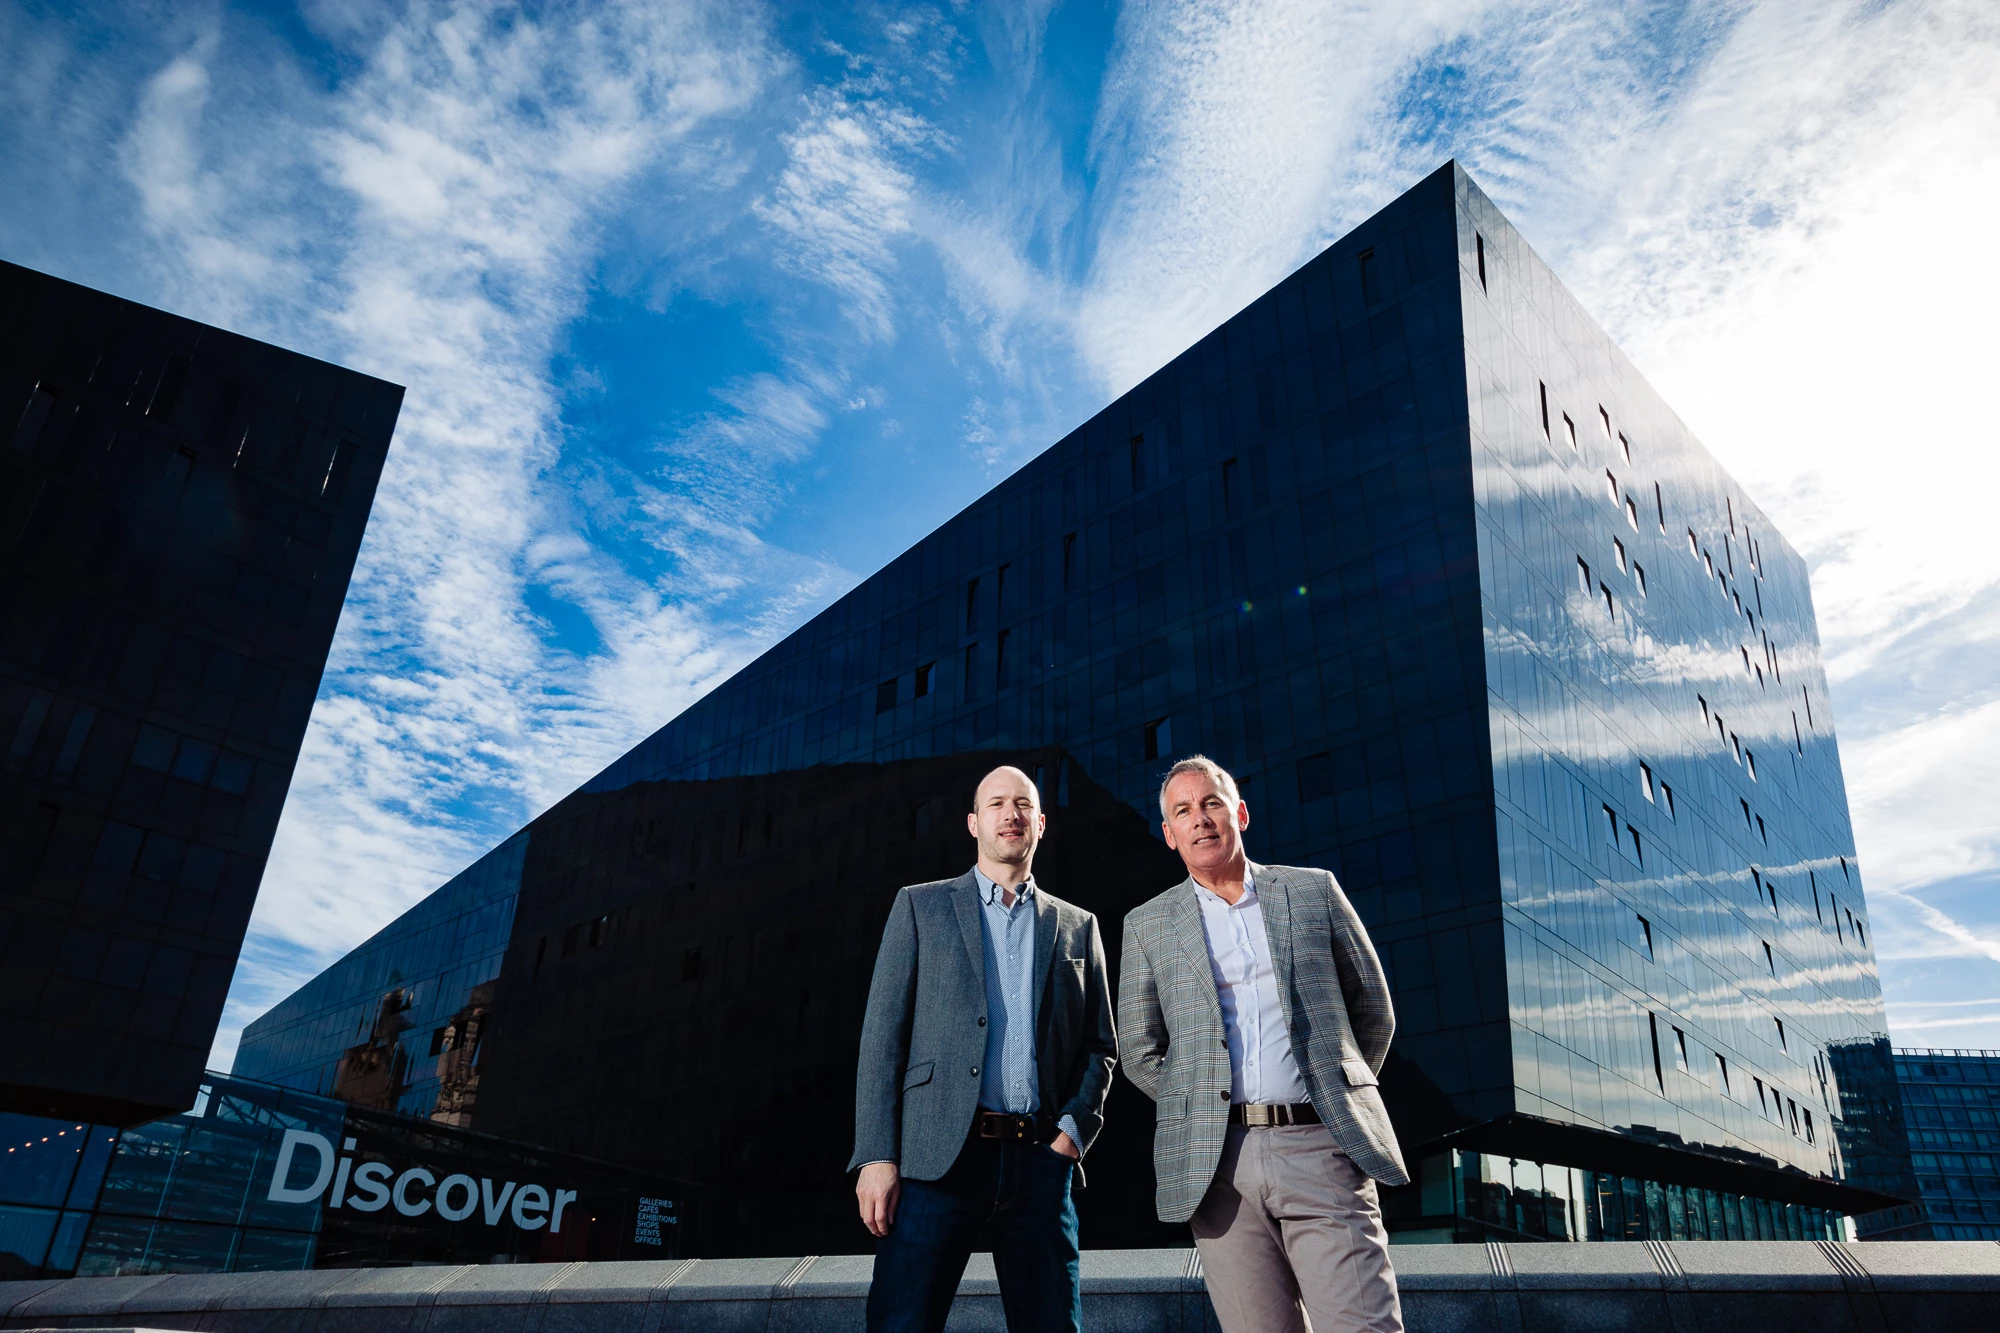 Ben Patterson and Paul Murphy outside RIBA North, the RIBA's national architecture centre on Liverpool's World Heritage Waterfront. It opened in June 2017, Intecho provided full lighting controls throughout.